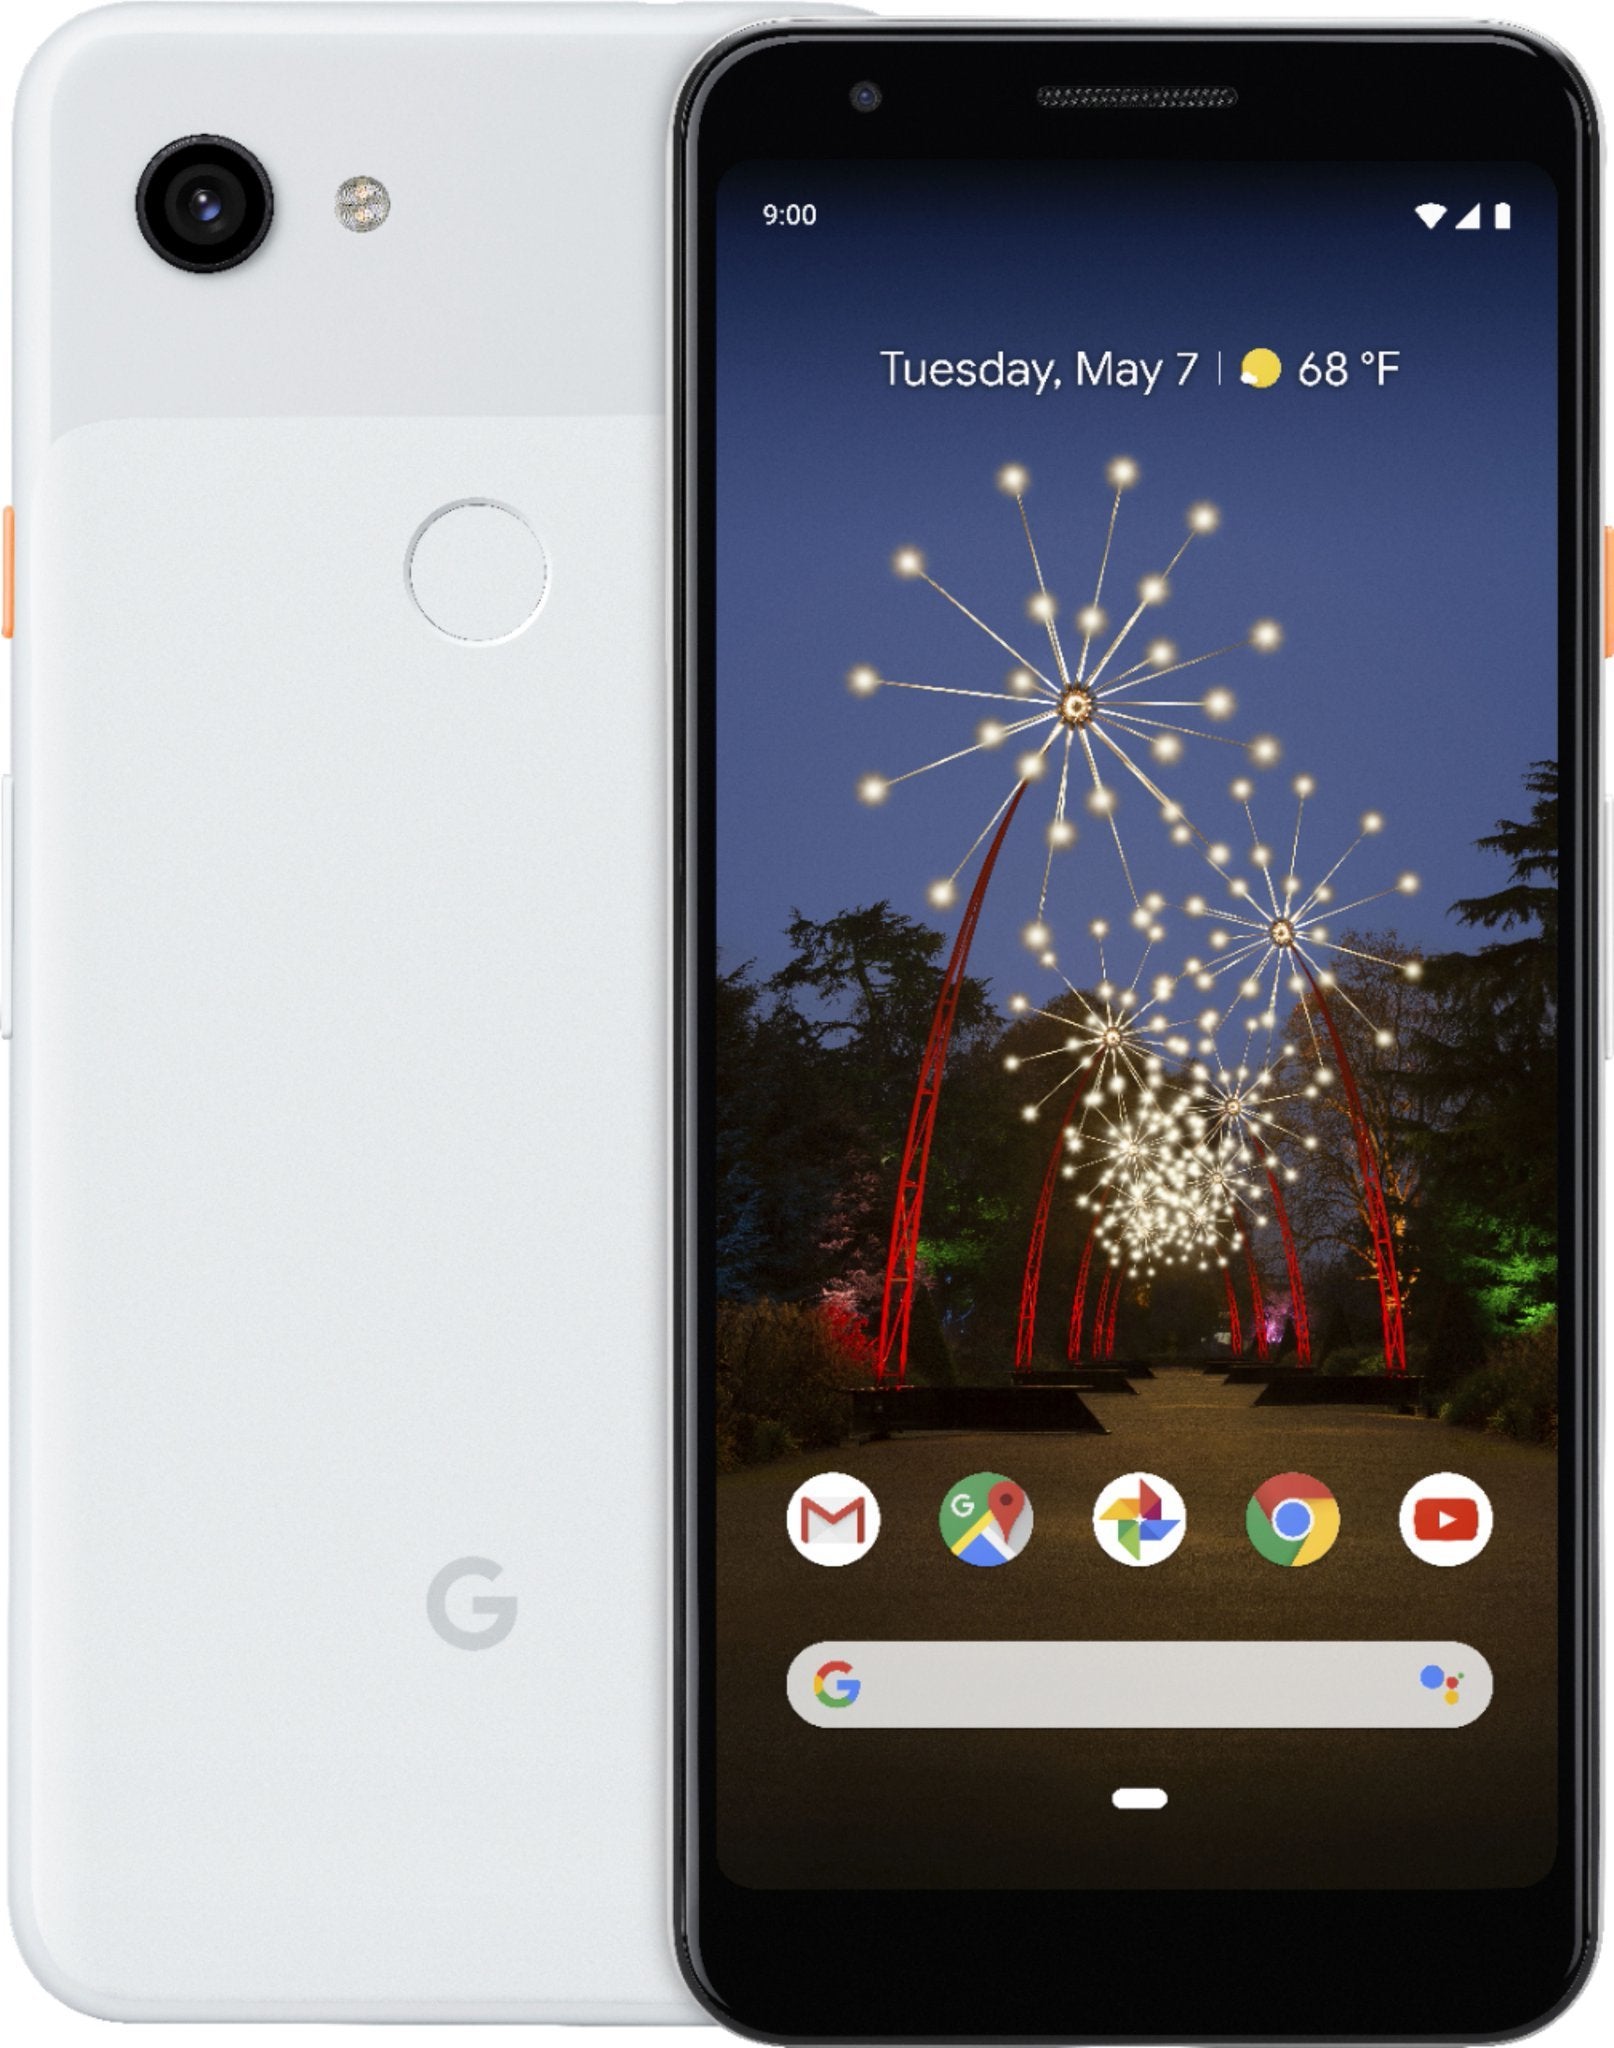 Newly leaked render of the Pixel 3a, the cleanest look so far - New leak gives us our best look at the Google Pixel 3a